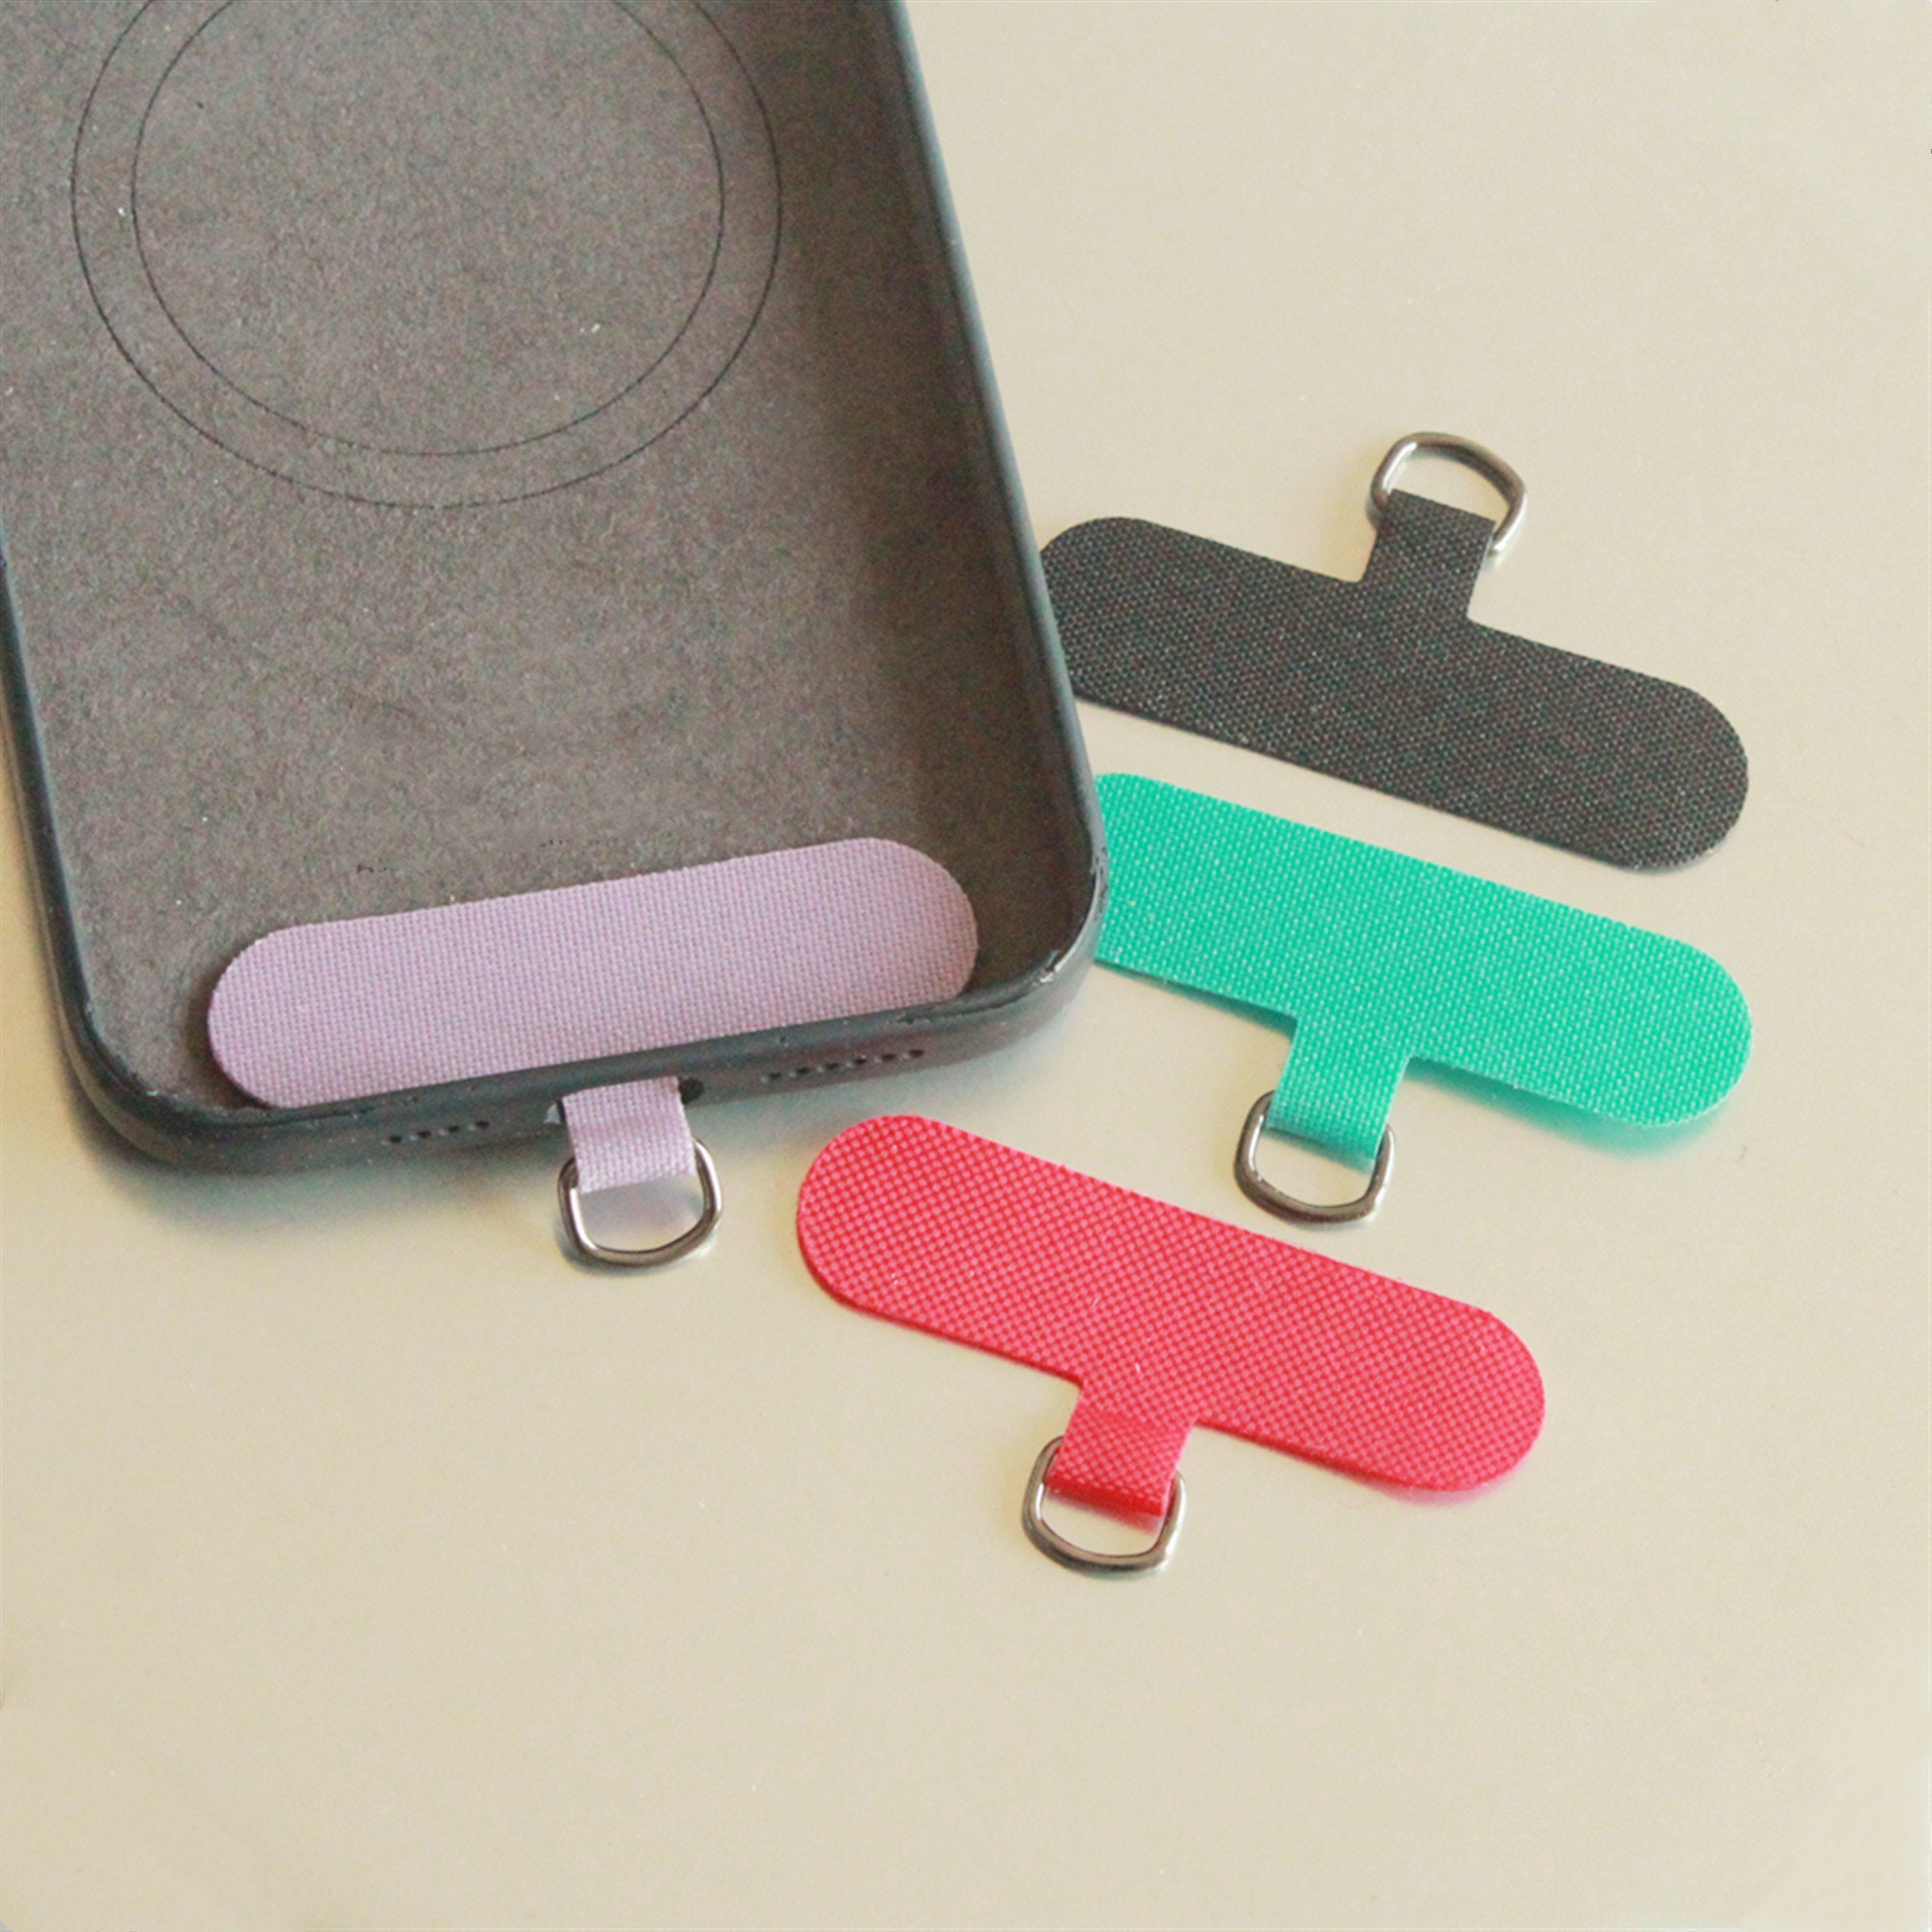 Phone Tether Tab Anchor Connector Card Digital SVG Cut File, DIY to Hang  Connect or Attach Phone to Keys, Lanyard, Wristlet, Etc. -  UK